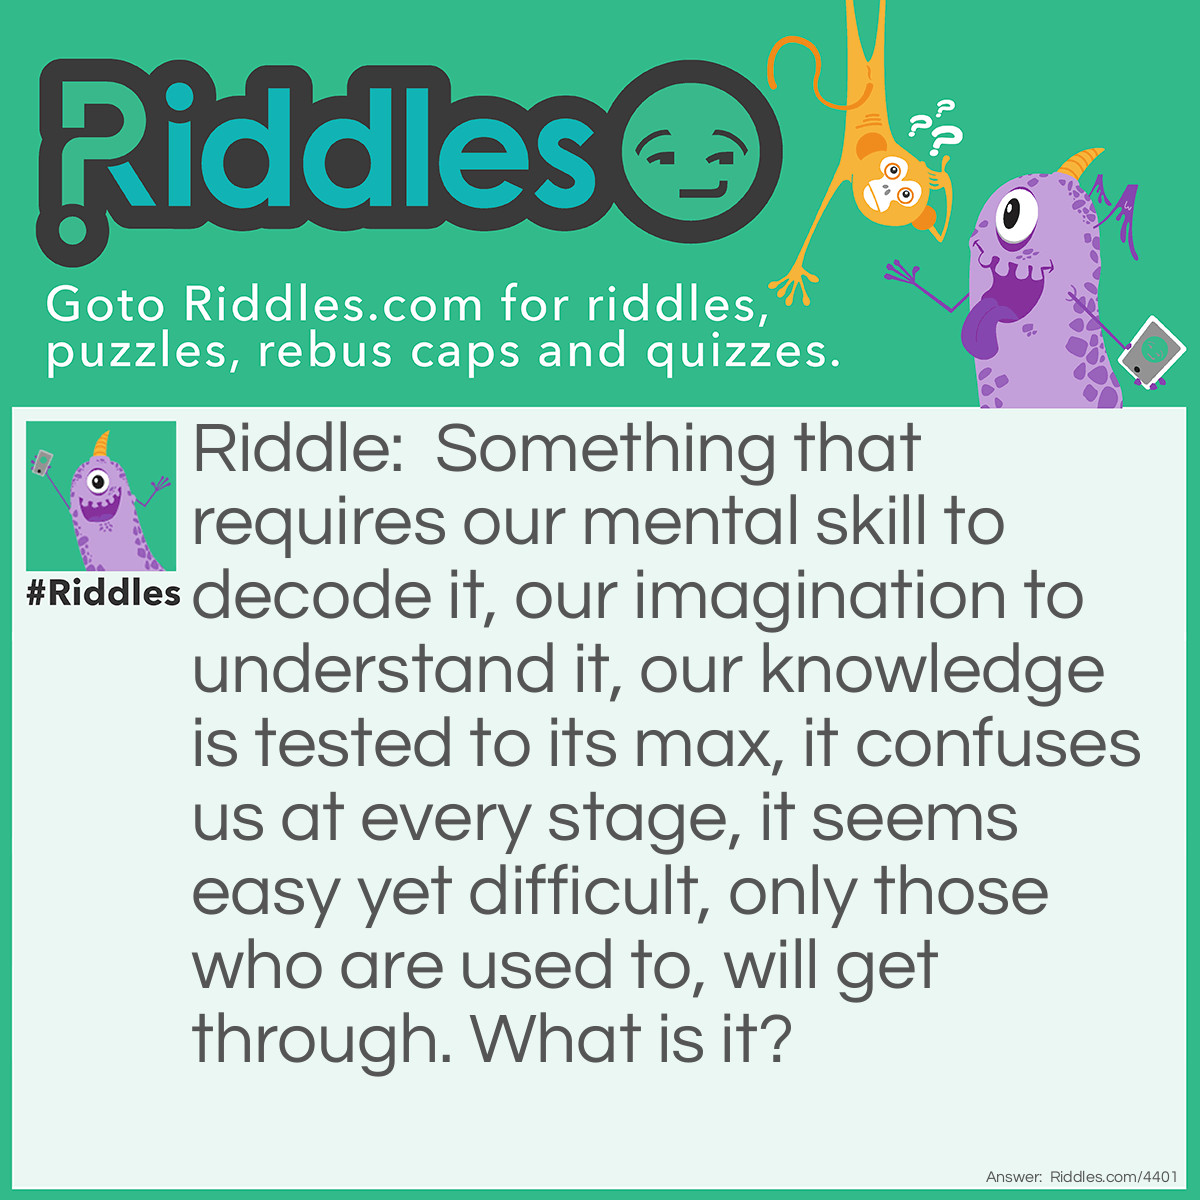 Riddle: Something that requires our mental skill to decode it, our imagination to understand it, our knowledge is tested to its max, it confuses us at every stage, it seems easy yet difficult, only those who are used to, will get through. What is it? Answer: A riddle.